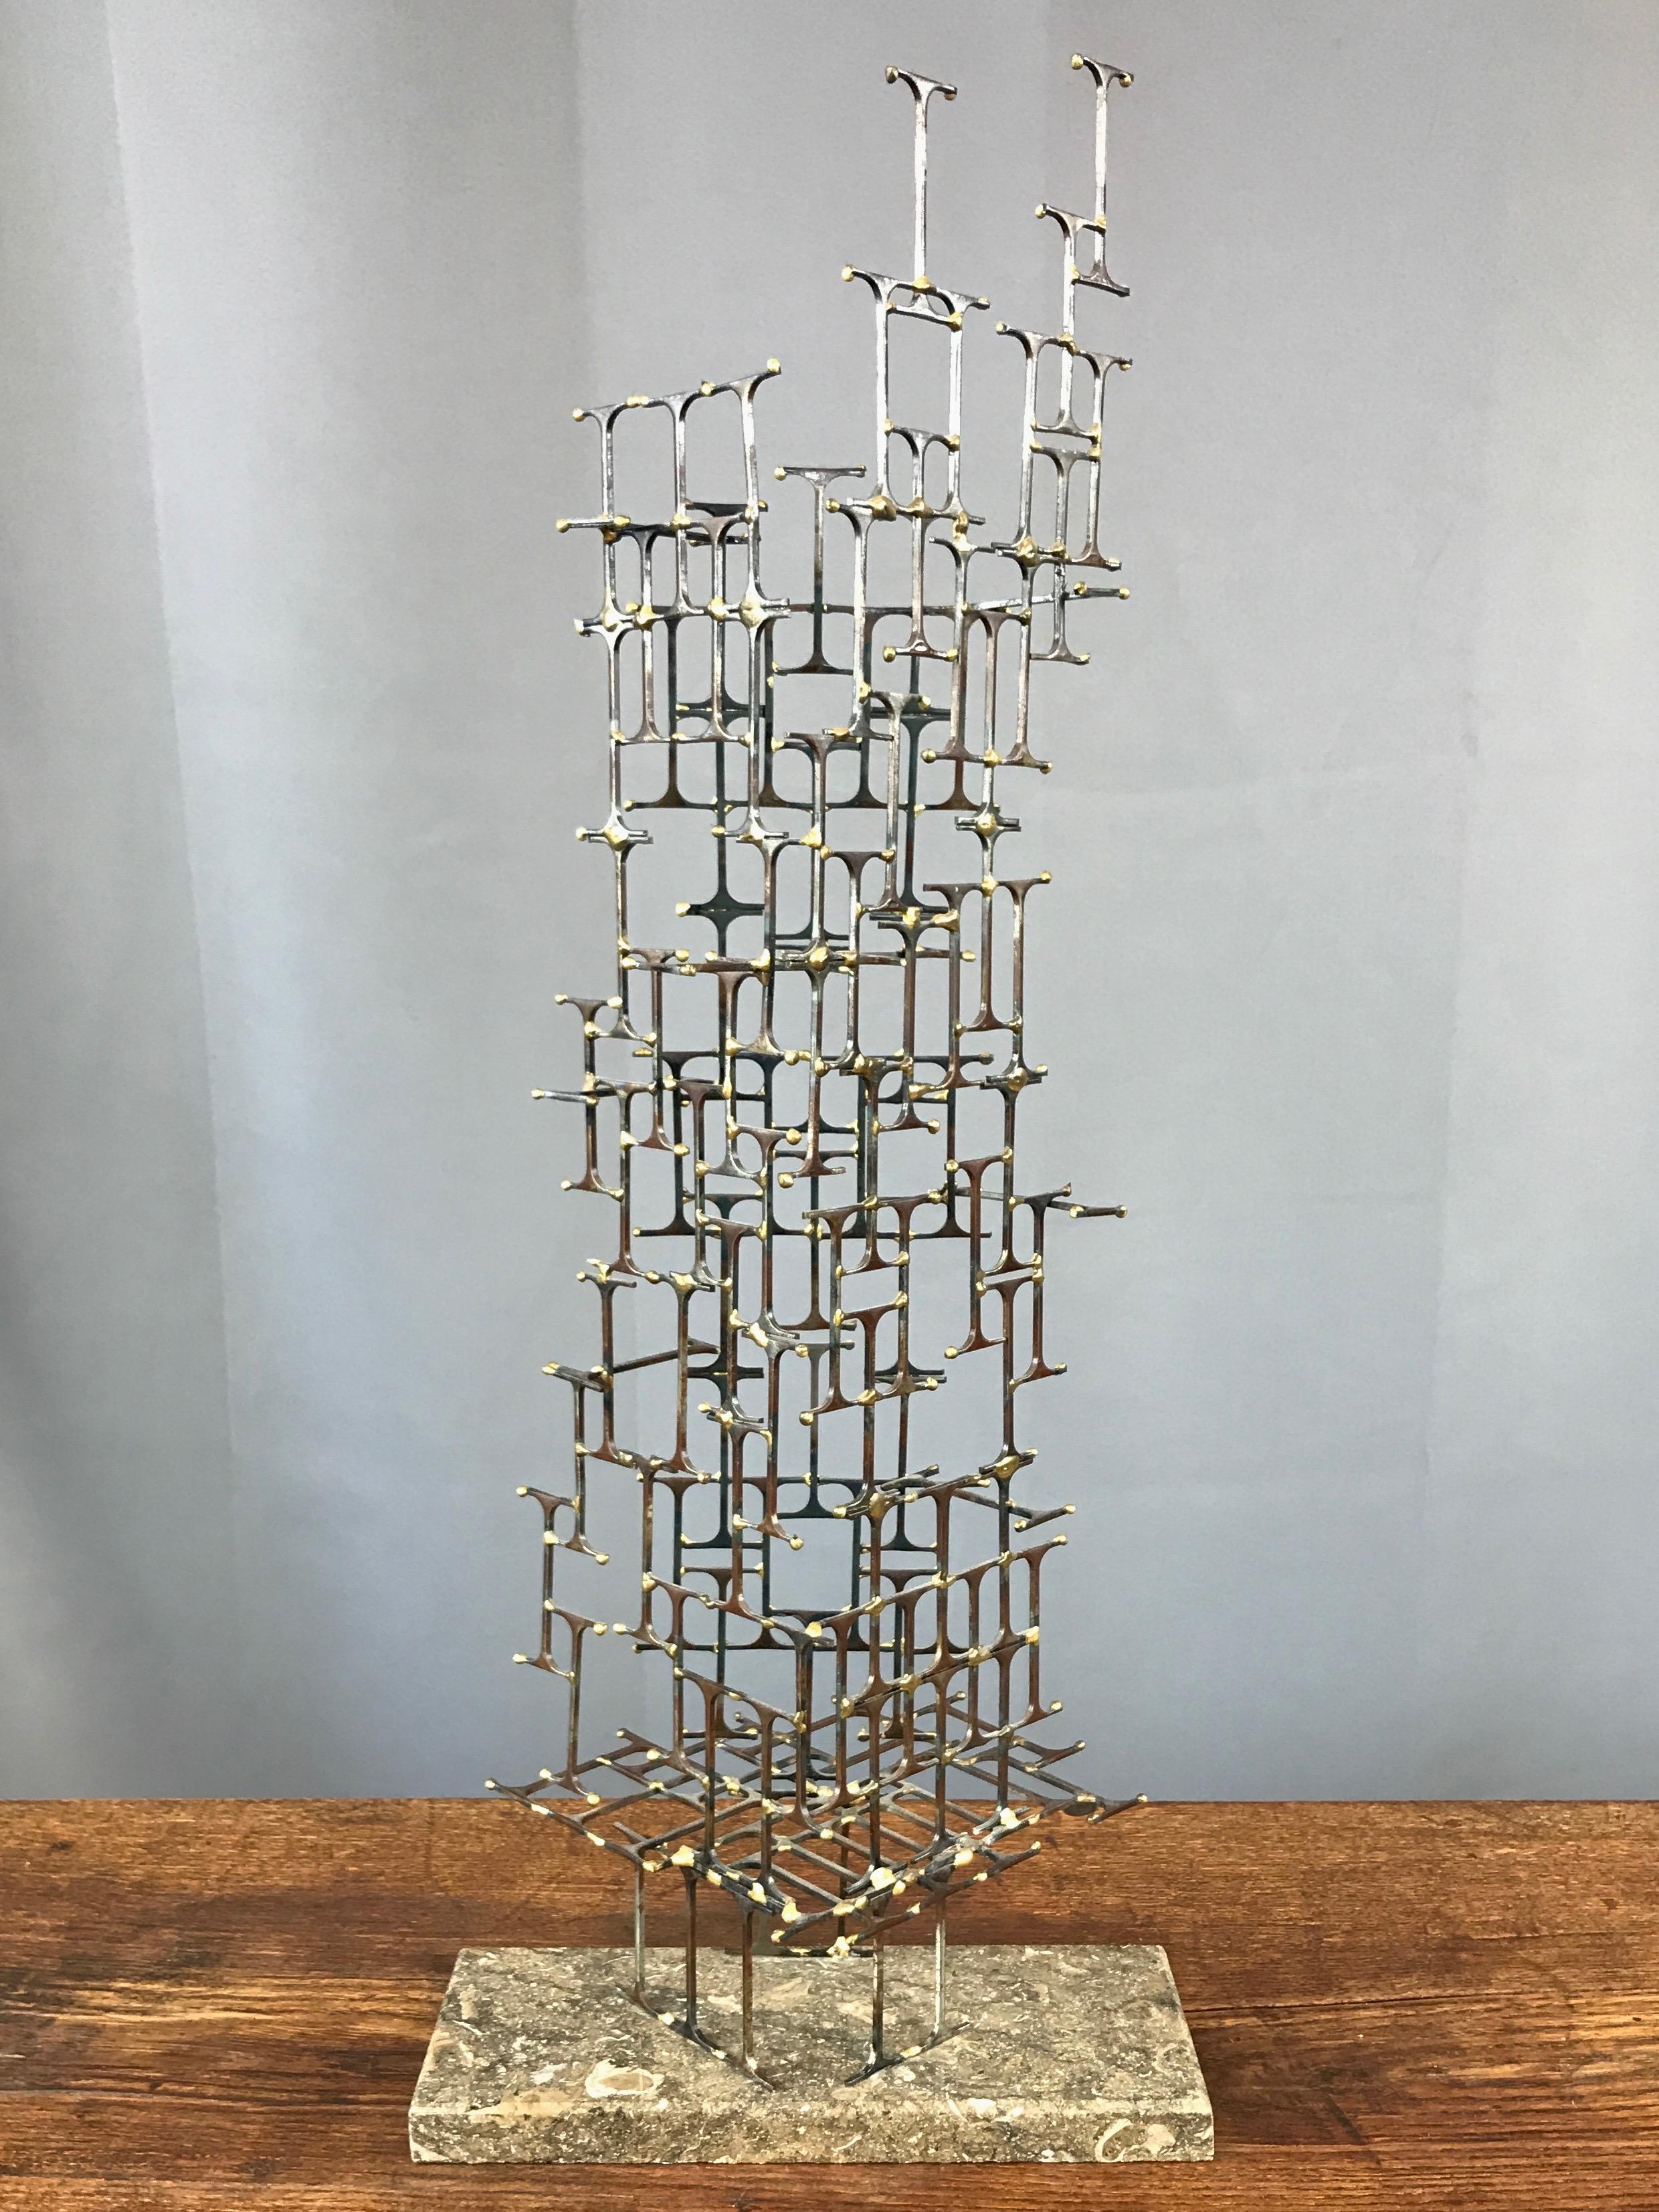 An exceptional tall Brutalist abstract metal sculpture on travertine base by Mario Jason, signed and dated.

Architectural form of I-beam-shaped iron nail elements with brass welds and tip accents. Artfully composed and complex cantilevered